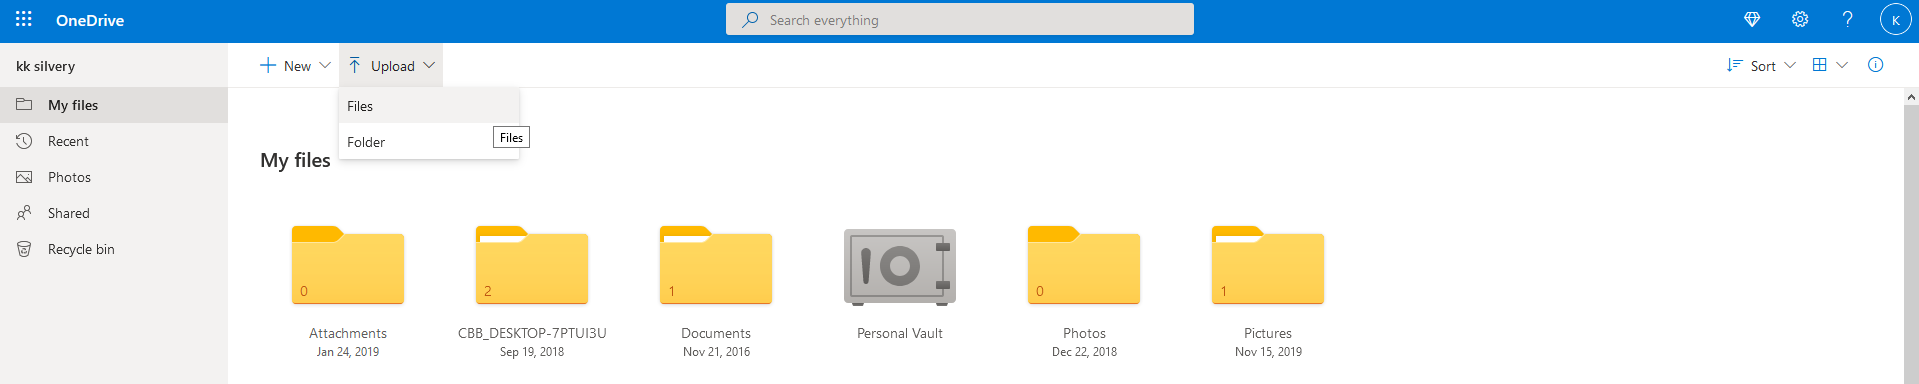 Copy Google Drive to OneDrive for Windows 10 - 8